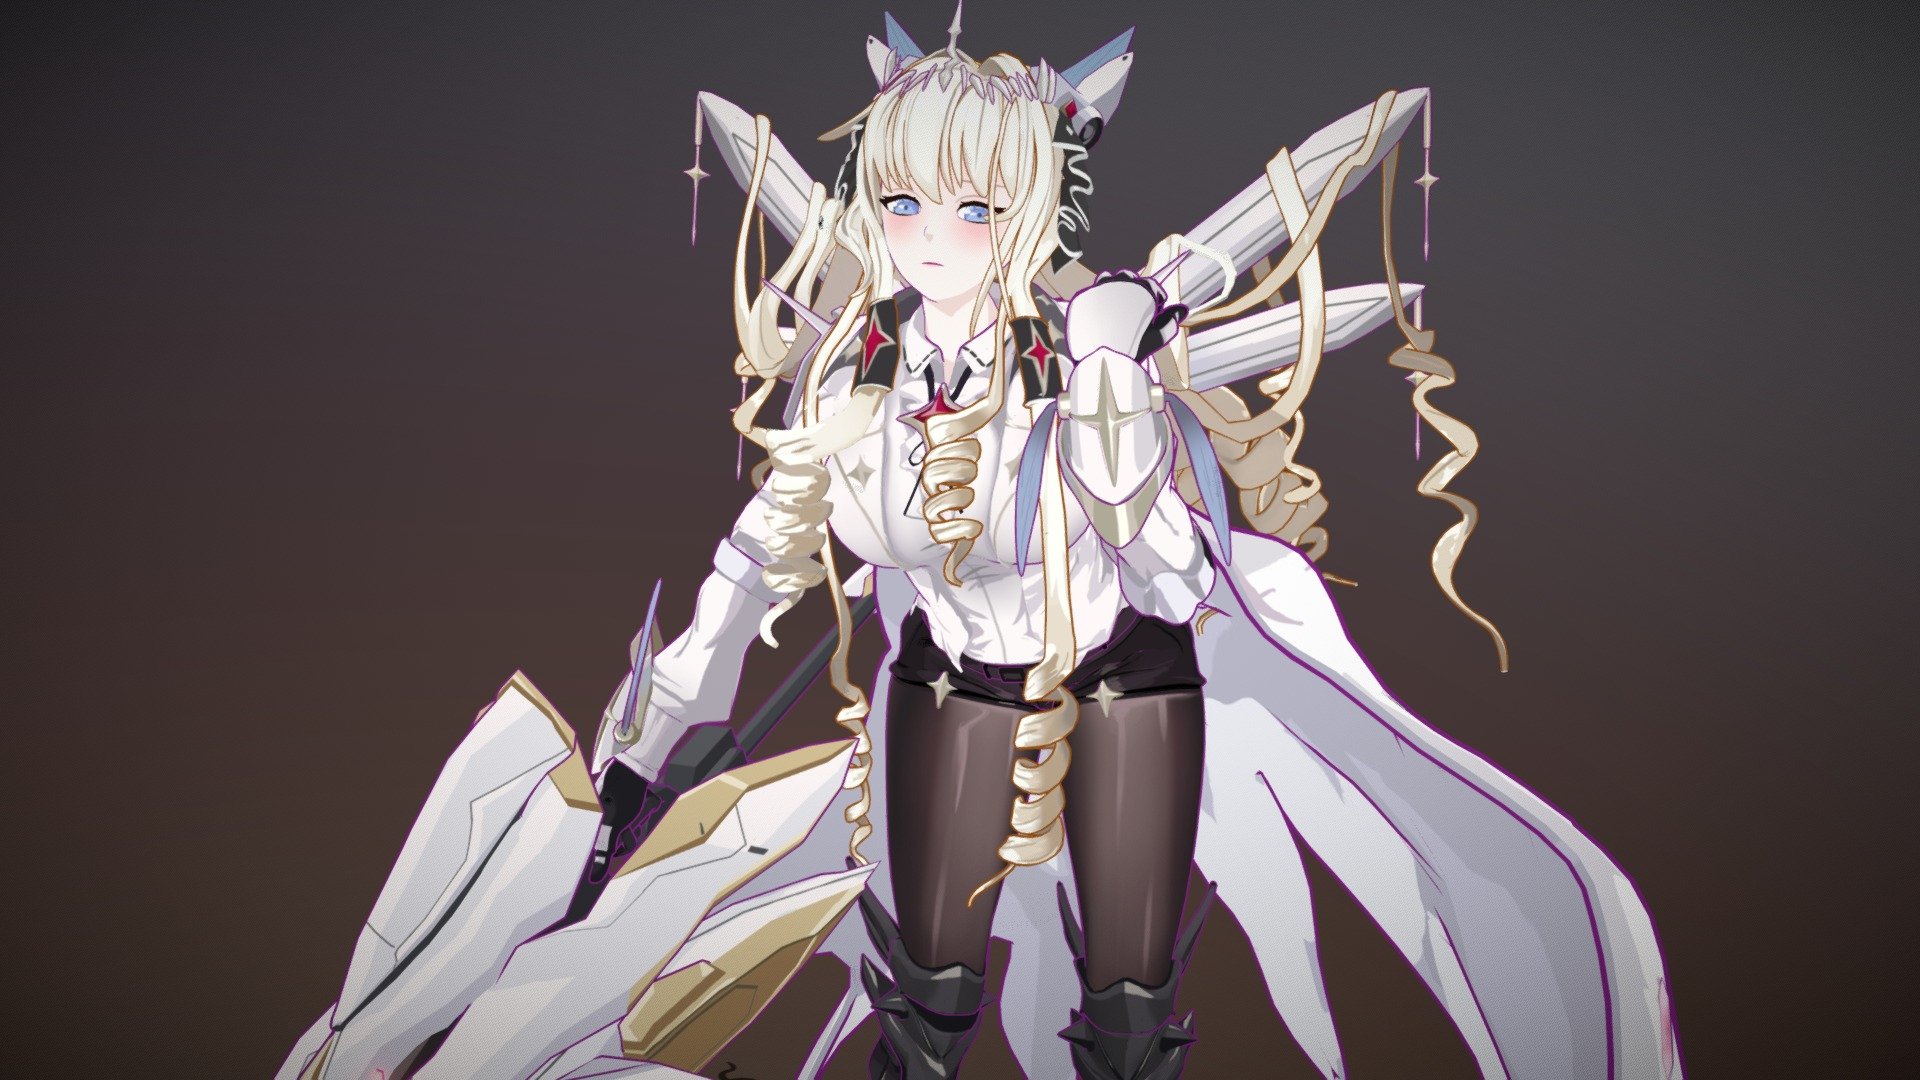 Best Nikke ever! LONG LIVE CROWN!!!! RELEASE HER NOW SHIFTUP

(灬♥ω♥灬) - Crown - 3D model by Artical 3d model